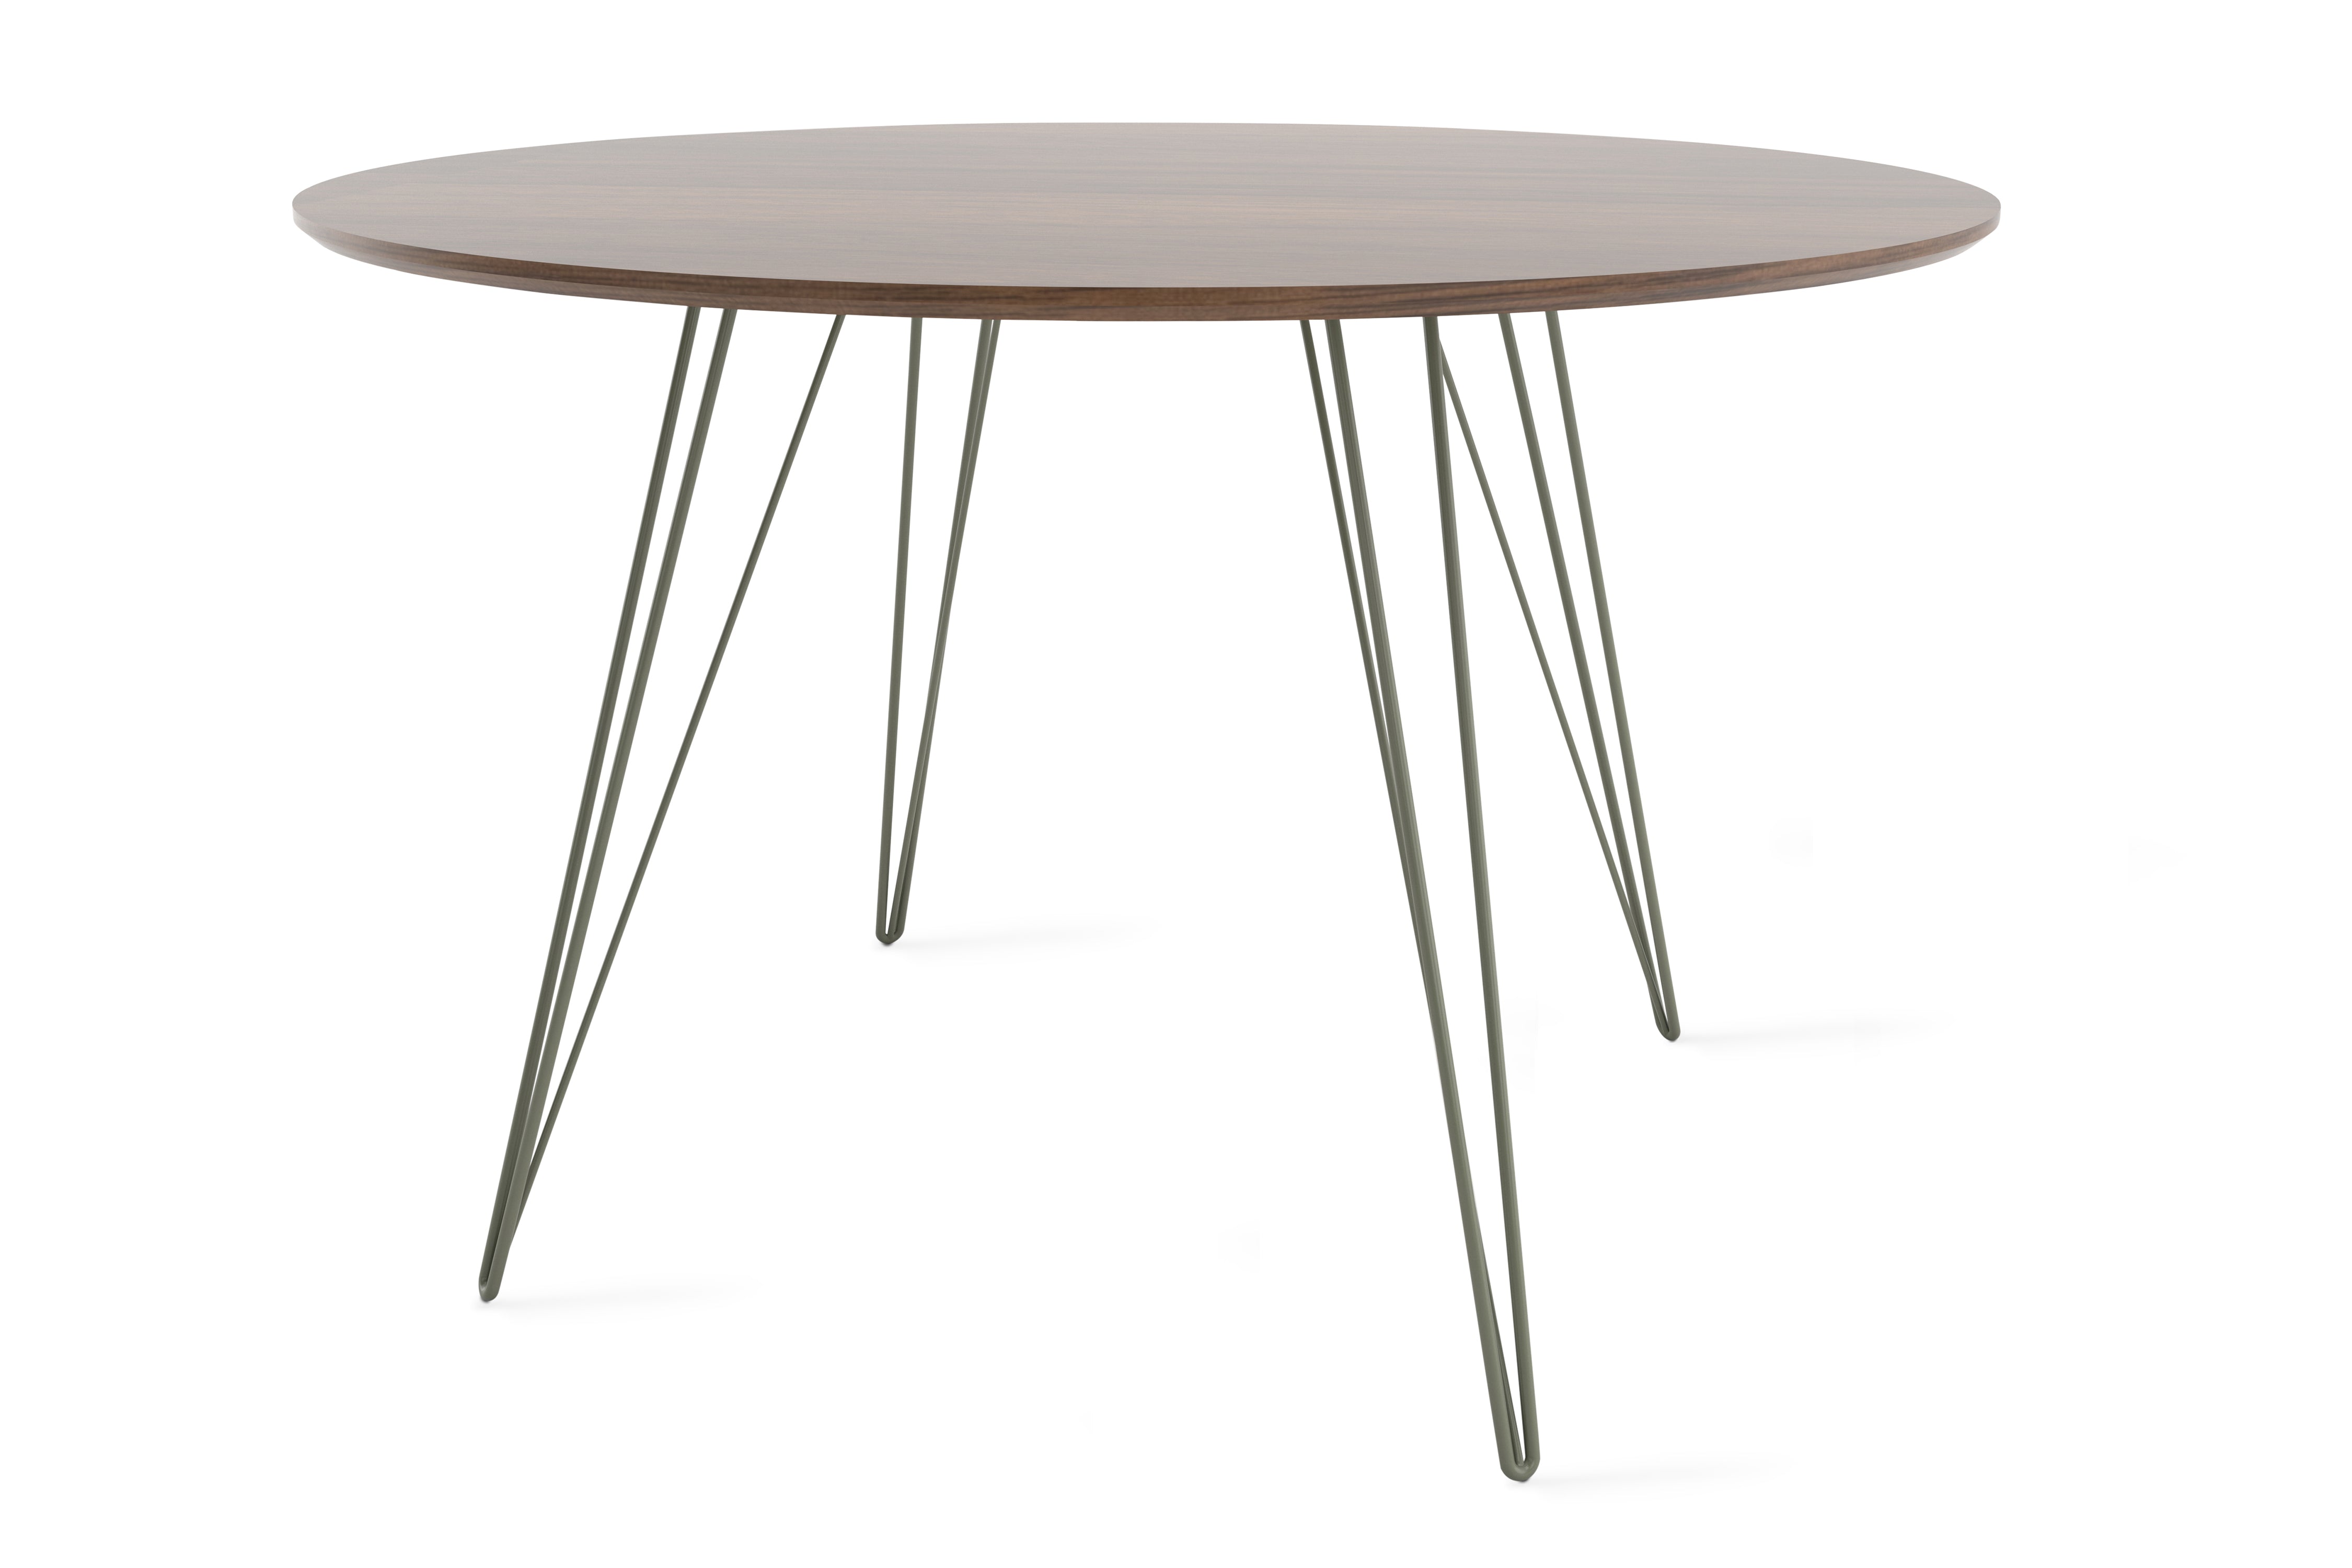 Round Walnut Dining Table, Walnut Wood Dining Table | Tronk Design